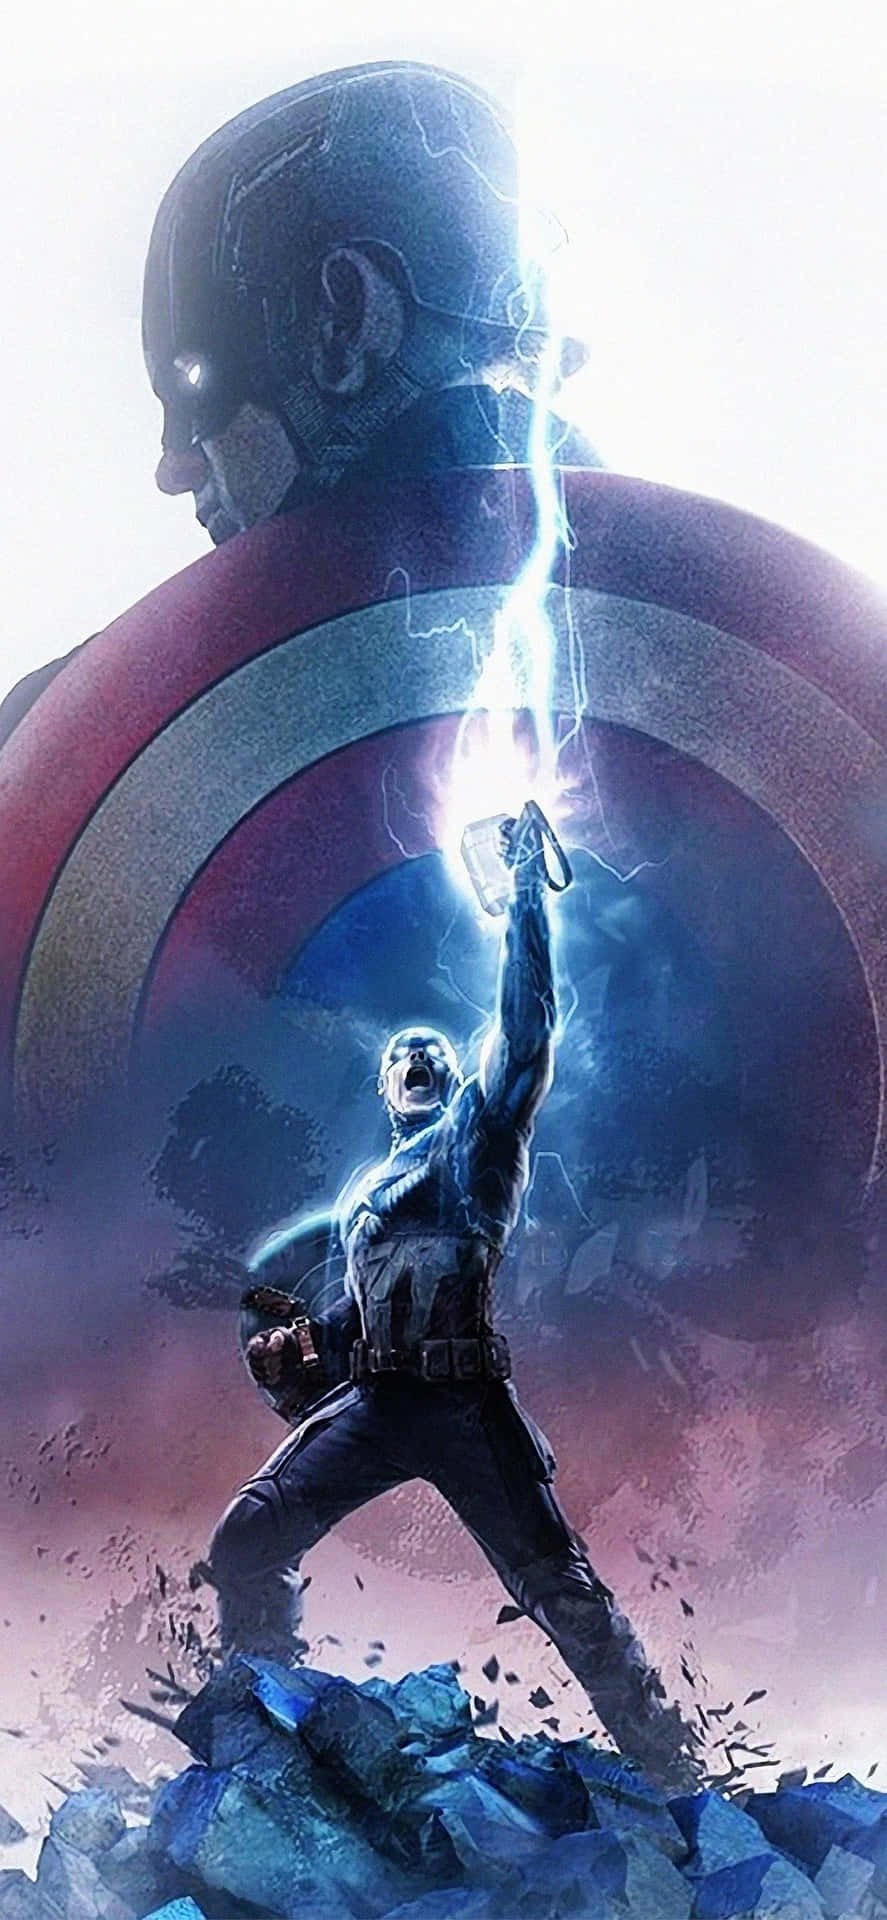 Watch Captain America Unleash the Power of the Avengers in 4K Wallpaper